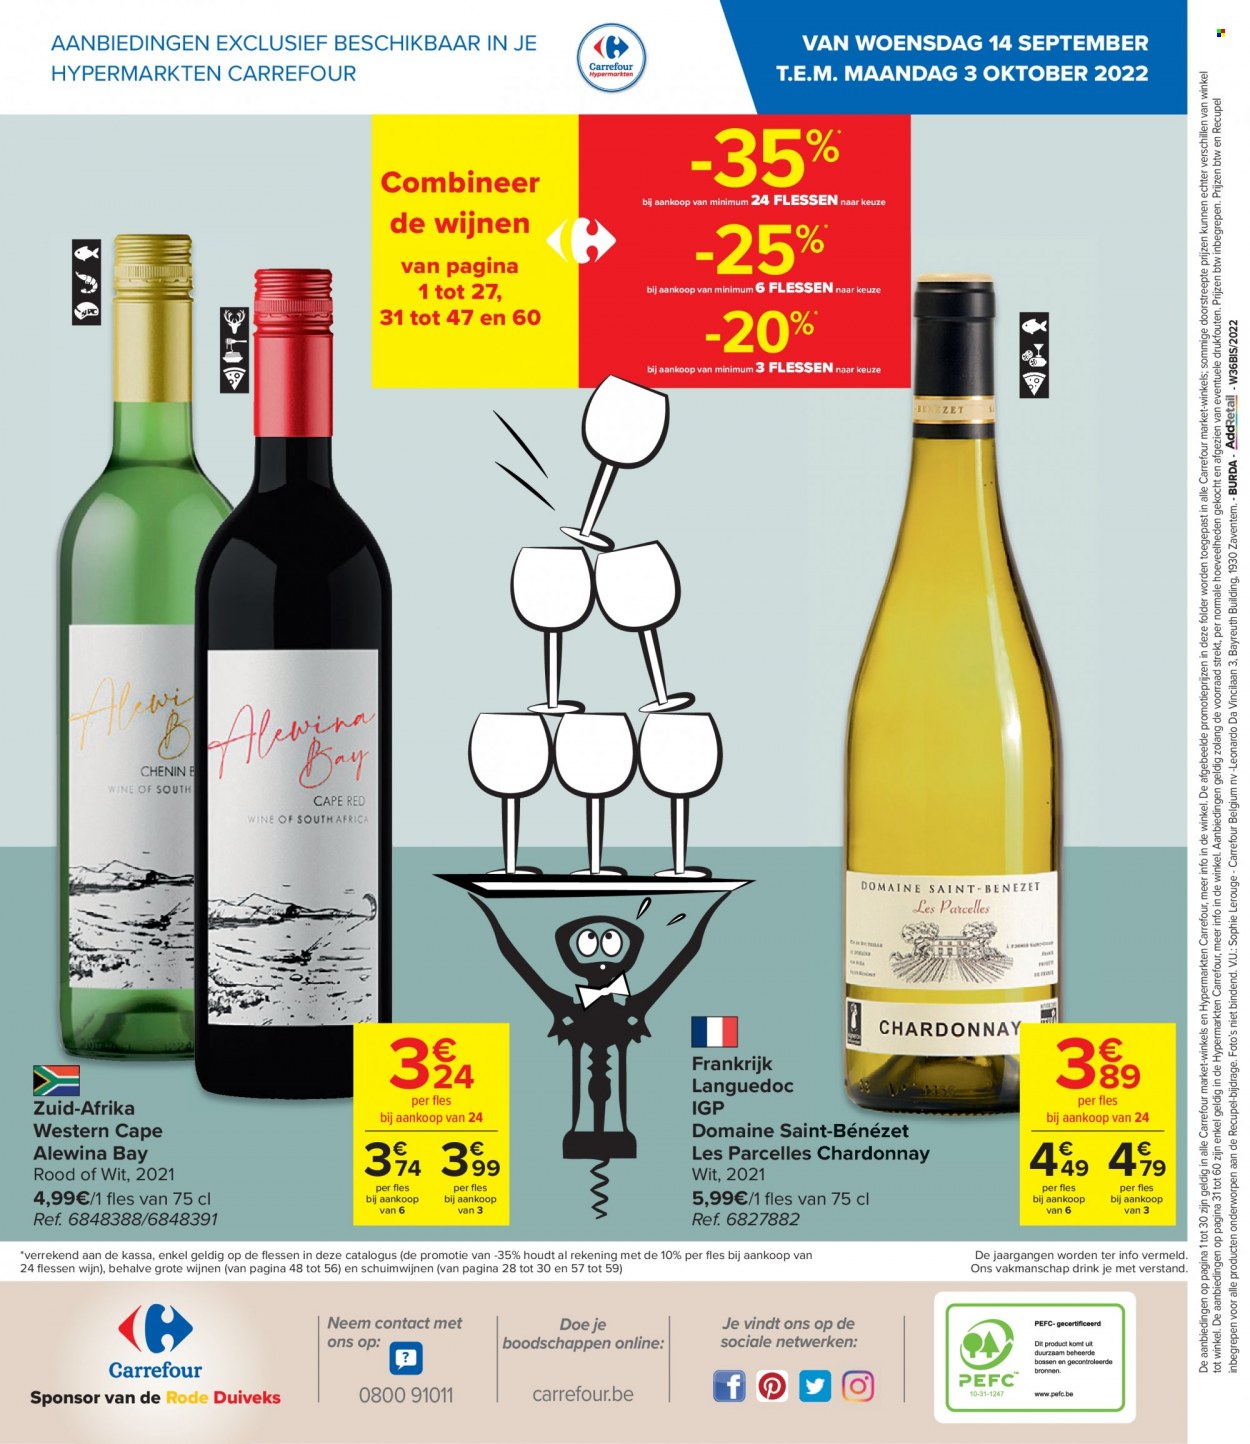 Catalogue Carrefour hypermarkt - 14.9.2022 - 3.10.2022. Page 30.